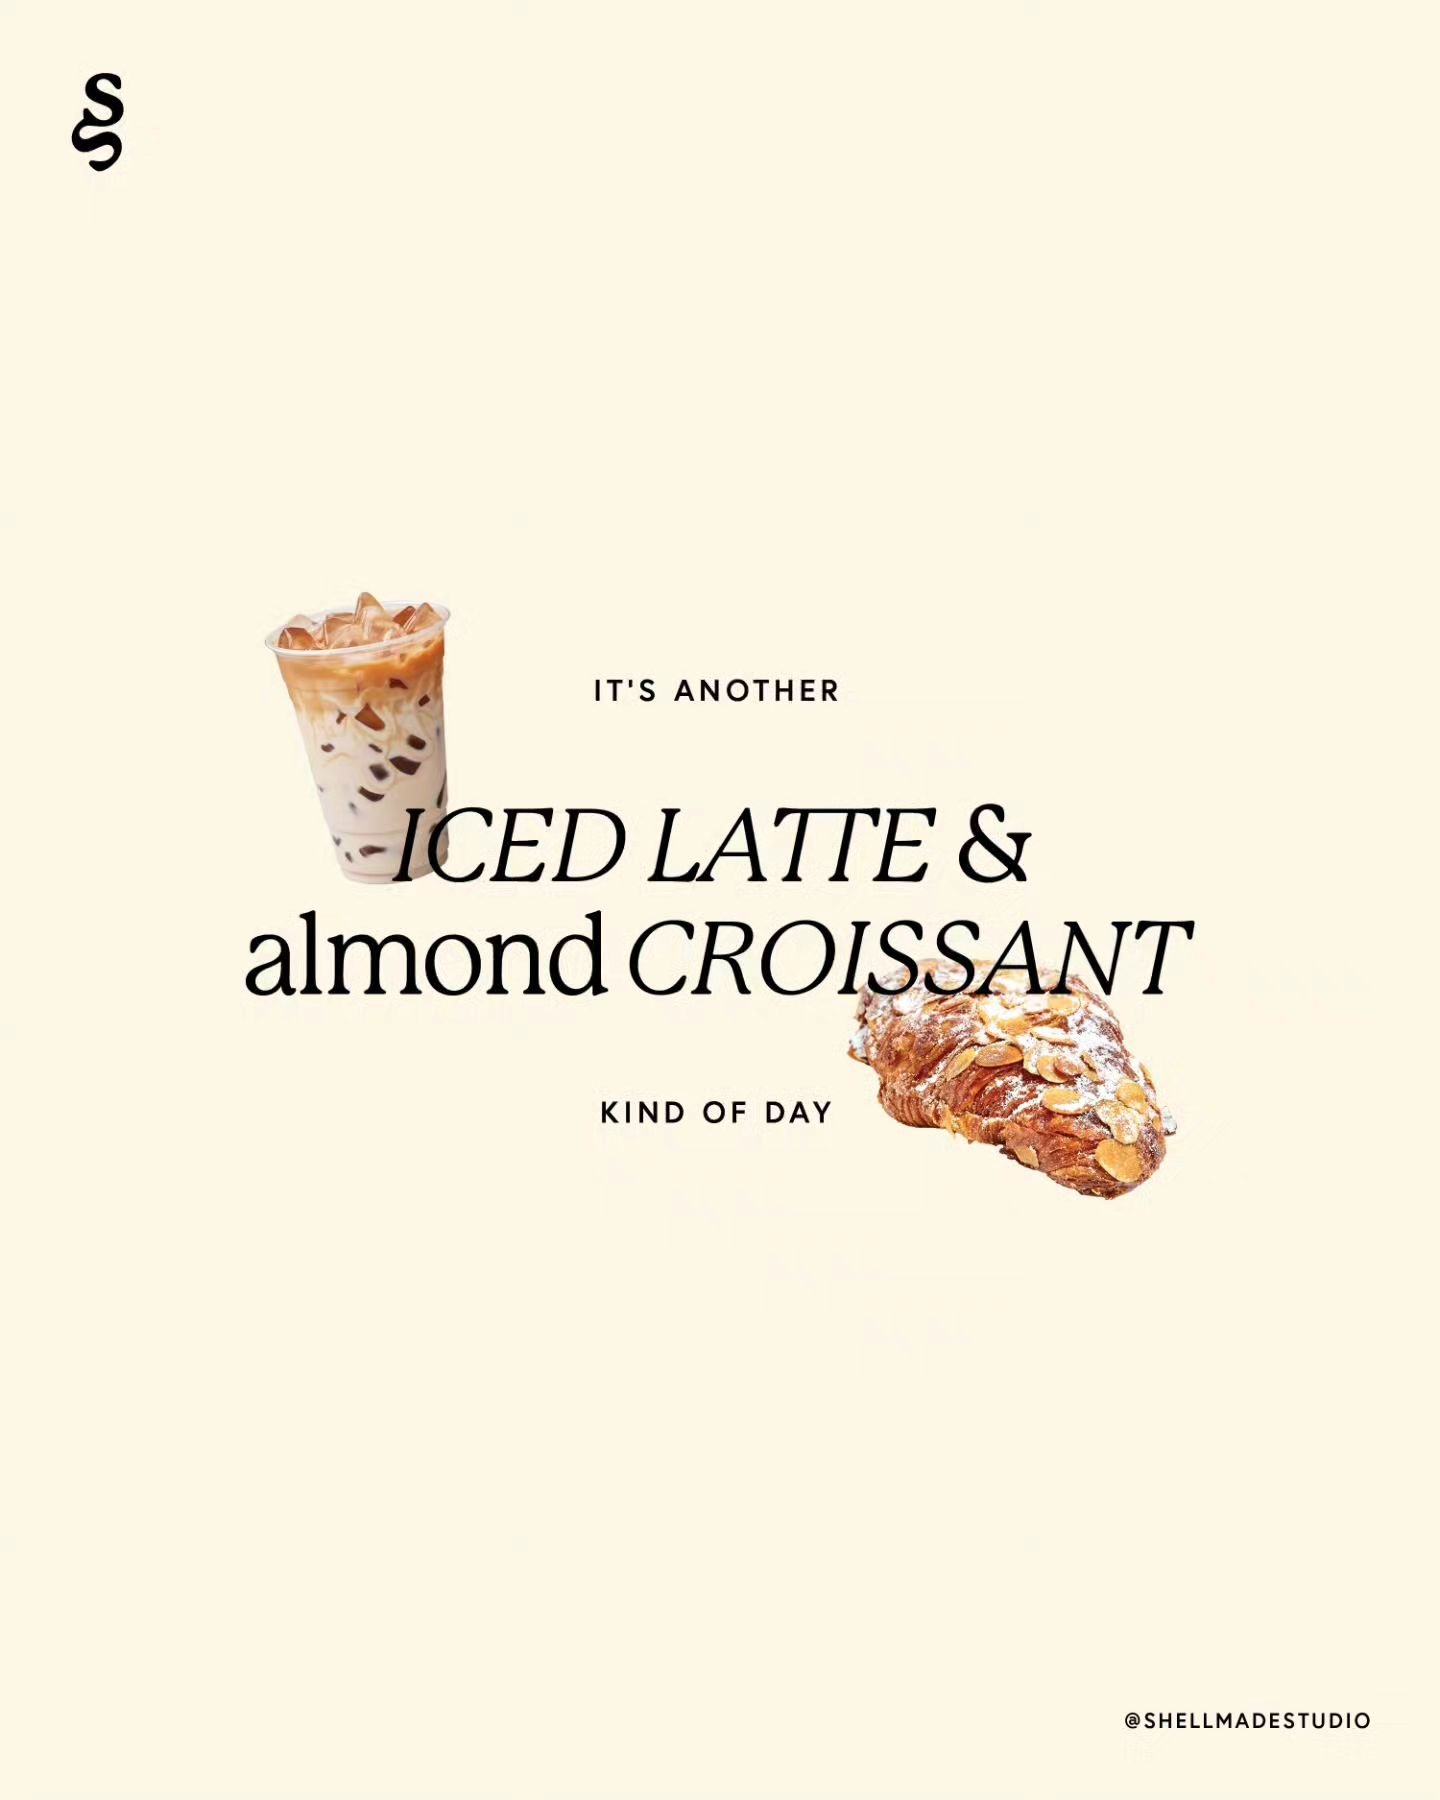 Tag your fav place to get yourself a little treat! ✨️
I can see this on a tote for weekend market trips or printed on a t-shirt for mid-week wfh days 😍

#icelatte #almondcroissant #littletreat #merch #graphicdesign #designerthoughts #totebag #tshirt